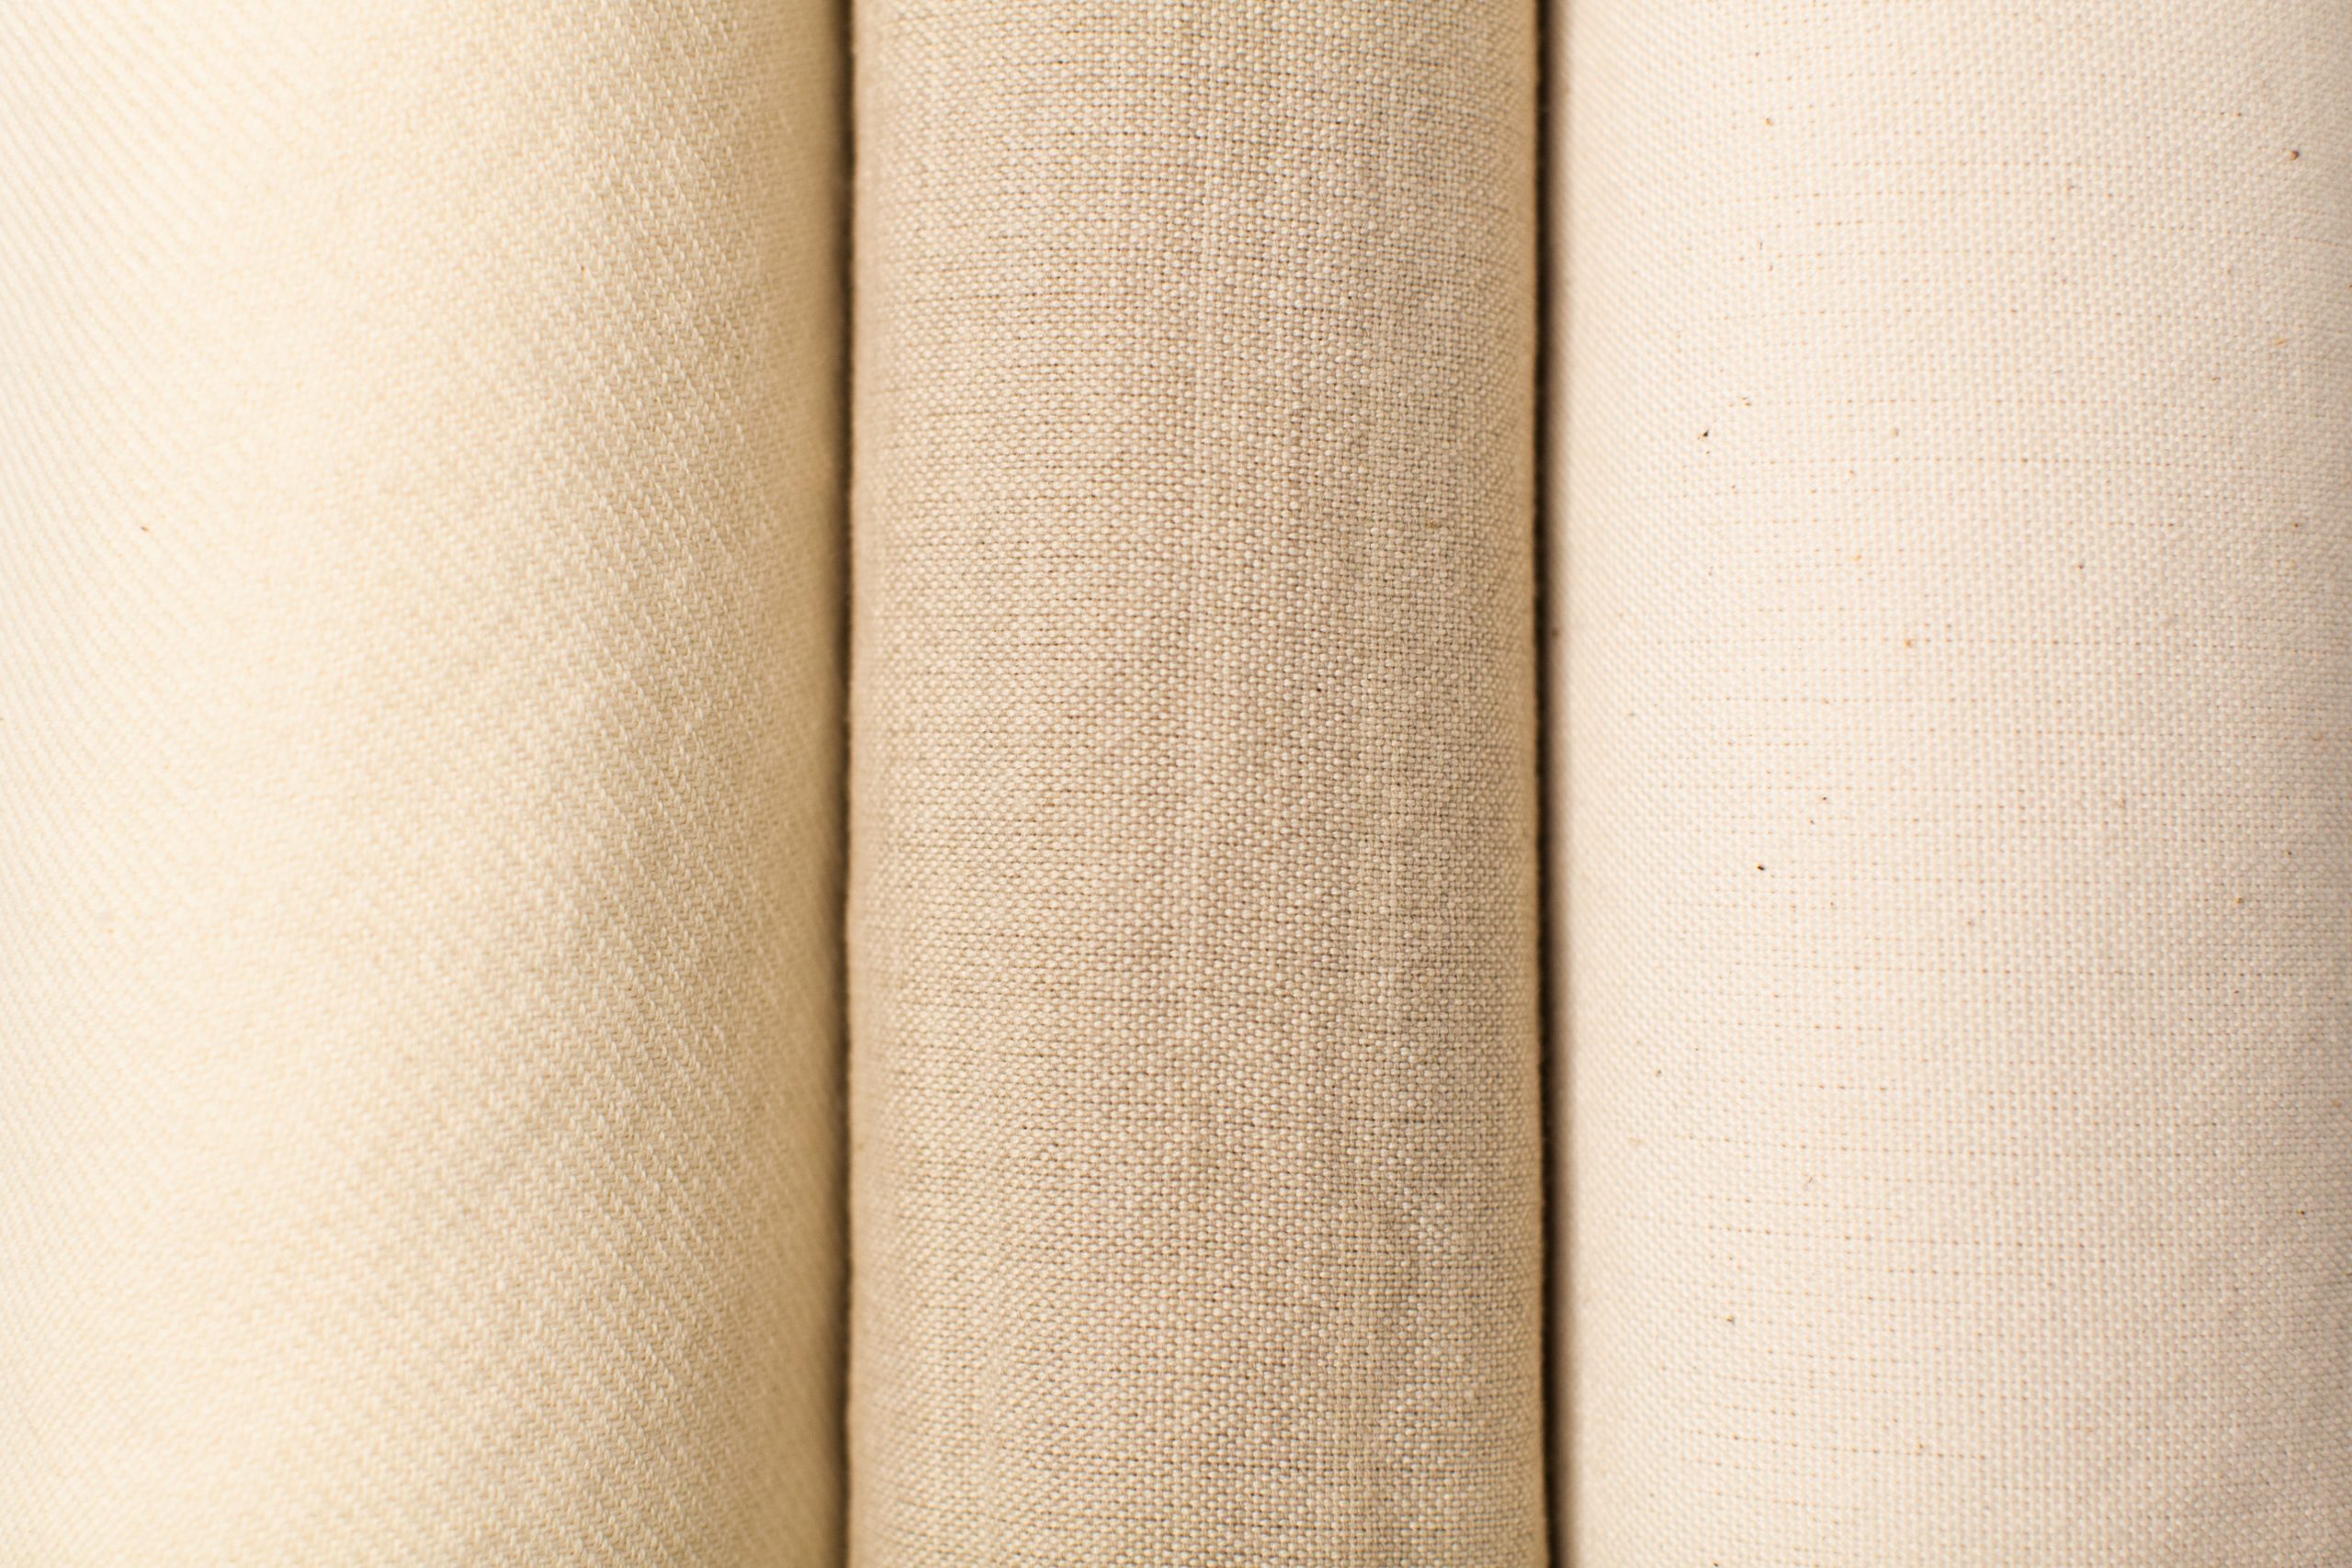 photograph of three cream colored woven textiles close up